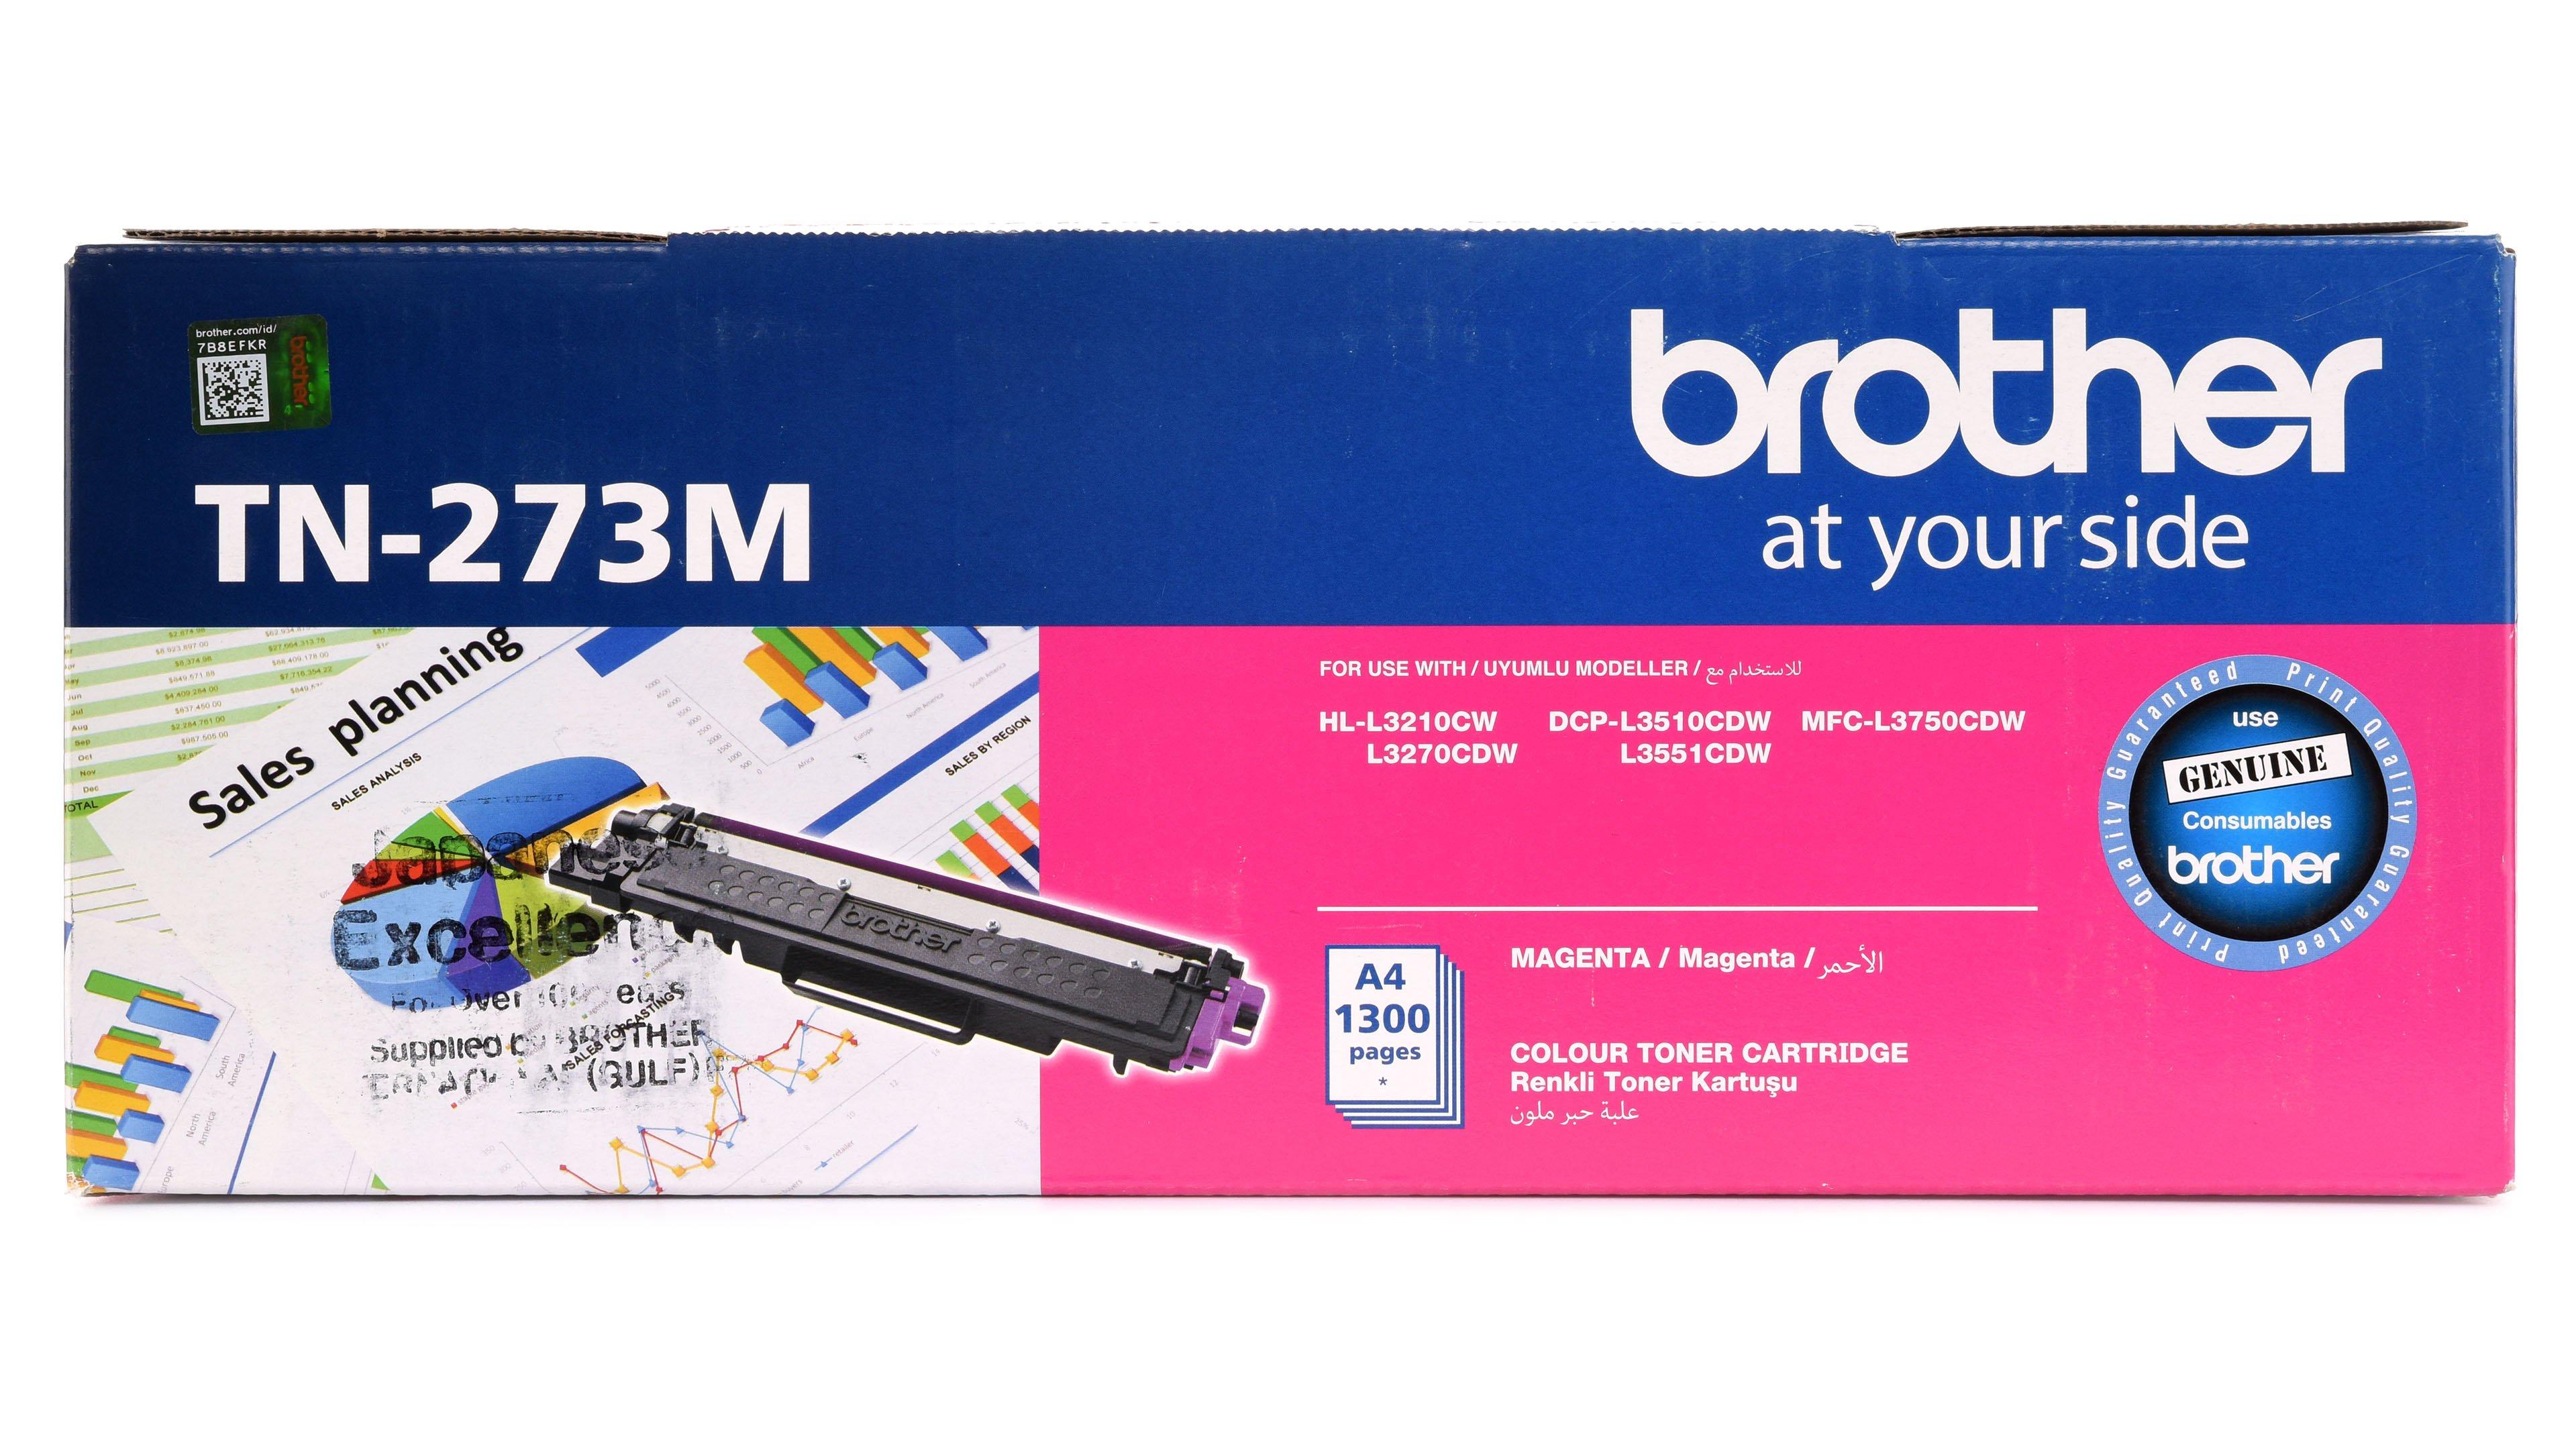 Skyldig Bære Orkan BROTHER Magenta Toner Cartridge,for Colour Laser printers HL-L3270CDW and  DCP-L3551CDW - eXtra Saudi